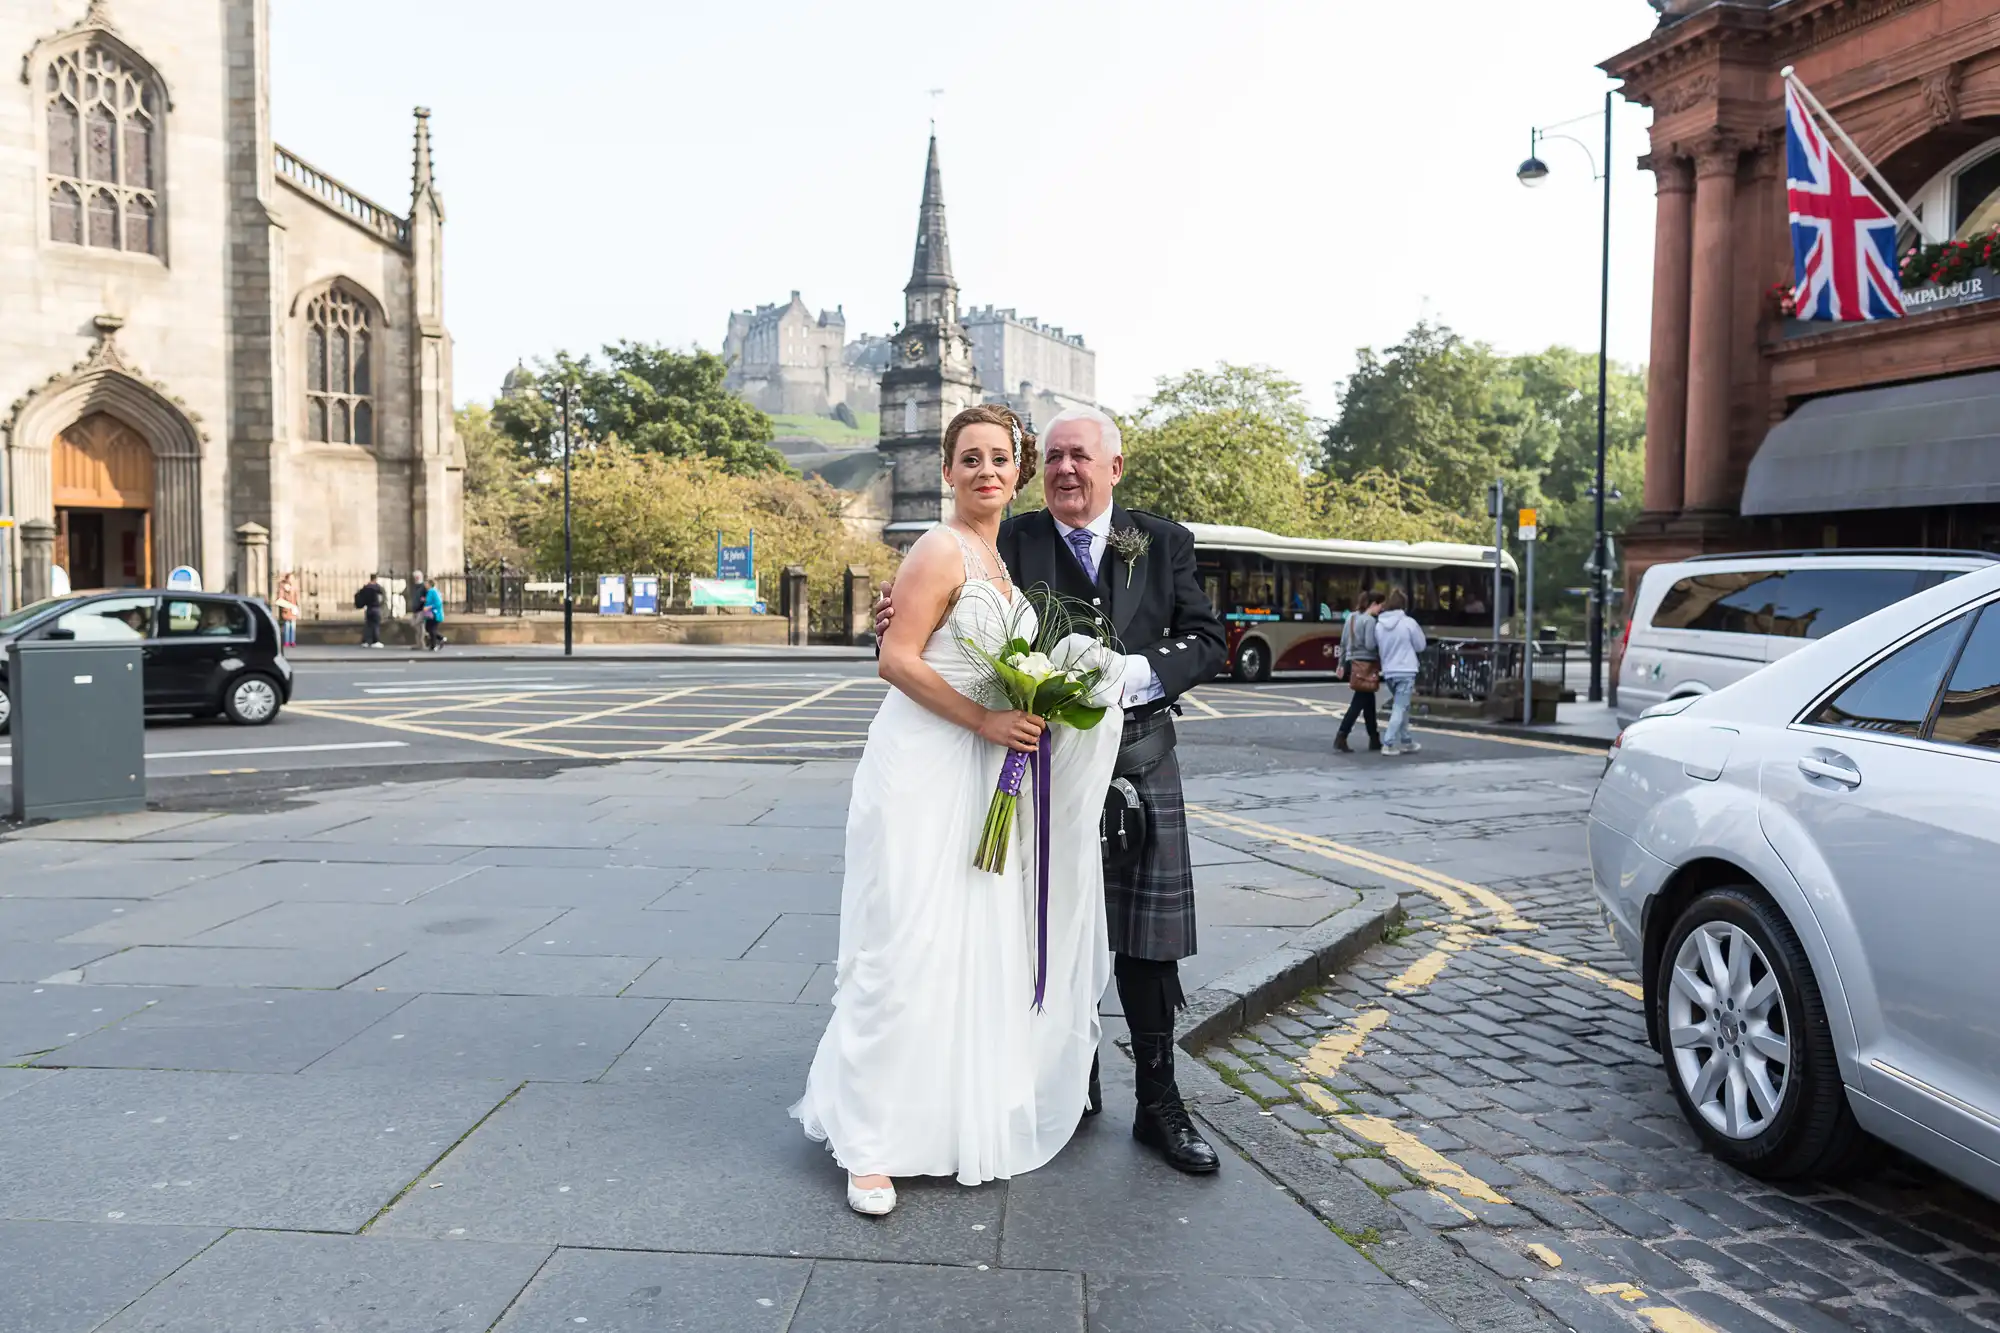 A bride in a white dress and a groom in a kilt stand on a city street, with historic buildings and a british flag in the background.